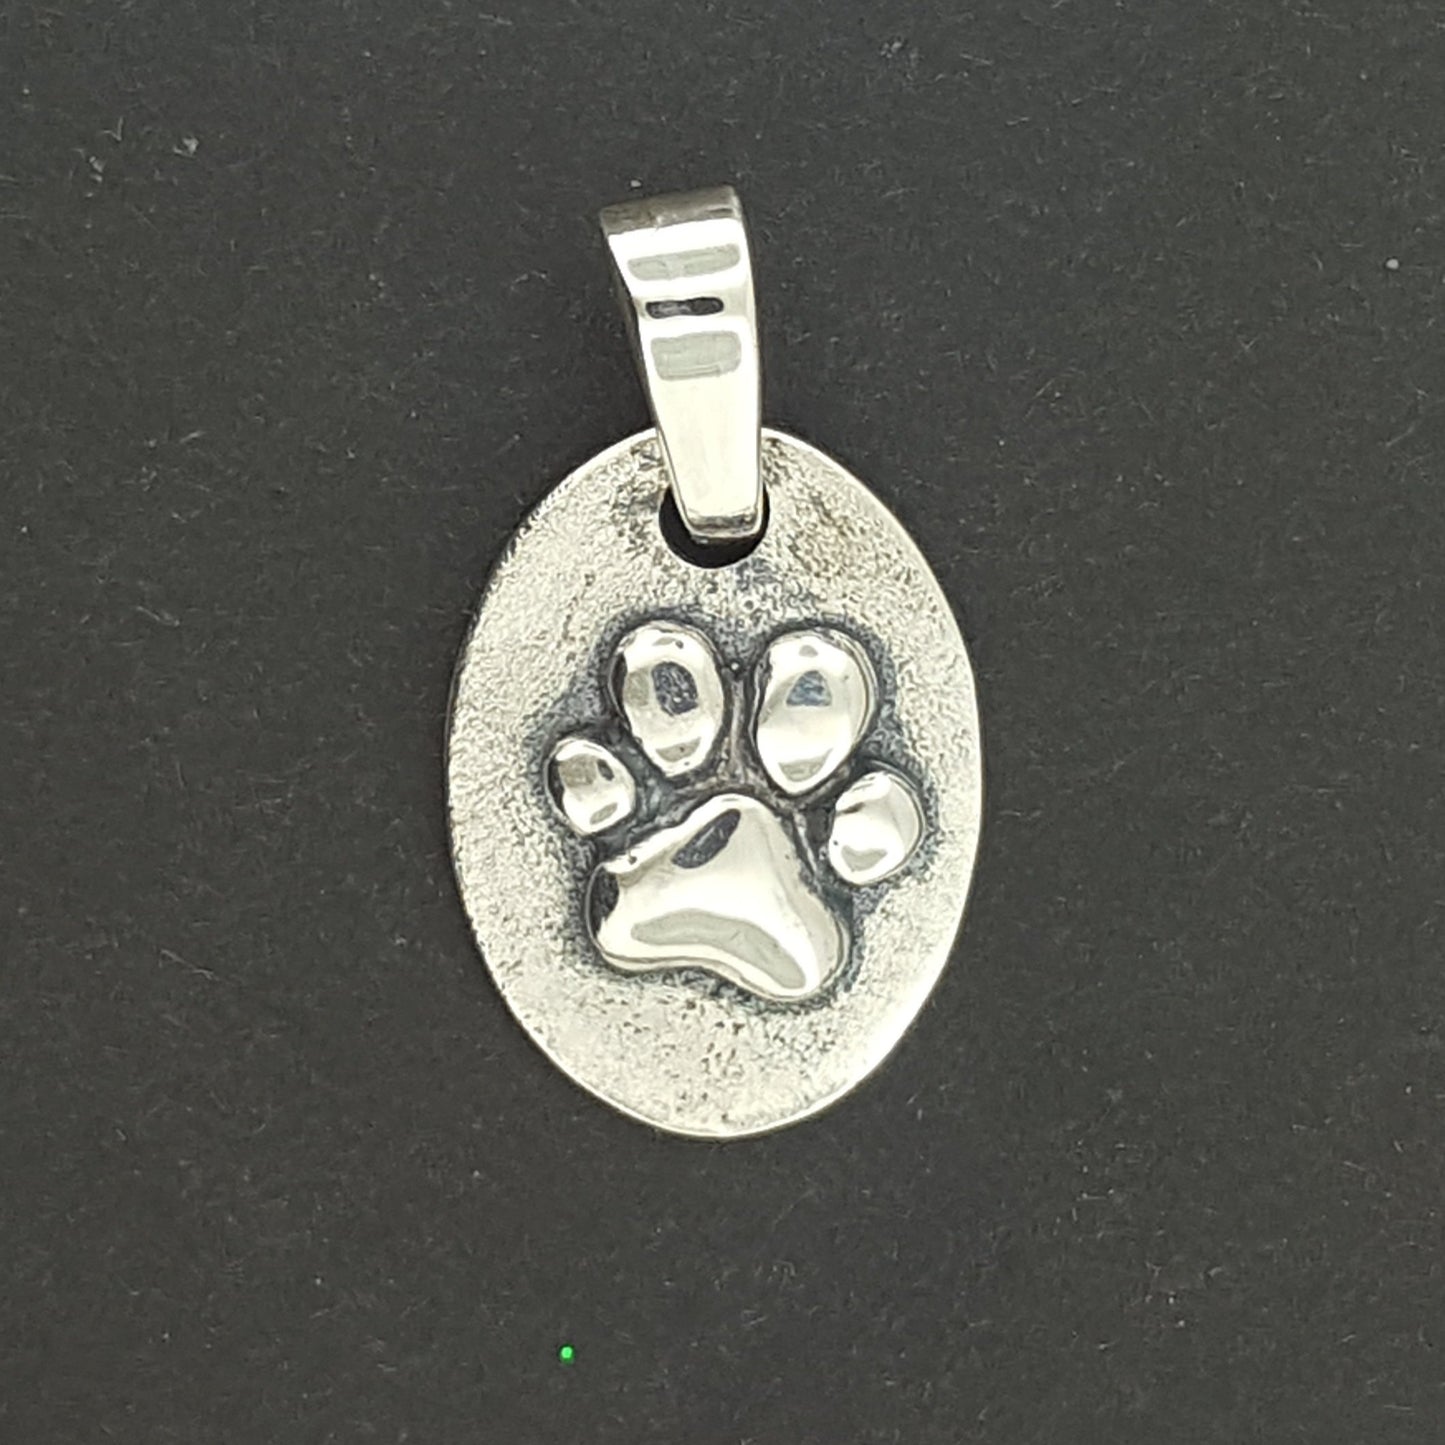 Paw Print Jewellery Set in Sterling Silver, Two Tone Signet Ring, Two Tone Ring, Silver Paw Print Jewelry, Silver Paw Print Jewellery, Silver Cat Paws, Silver Toe Bean Ring, Paw Stud Earrings, Paw Print Ring, Paw Print Earrings, Cat Paw Jewellery, Cat Paw Jewelry, Paw Print ring, Paw Print Charm, Paw Print Pendant, Animal Paw Print, Paw Print Jewelry Set, Paw Print Jewellery Set, Animal Lover Jewelry, Animal Lover Jewellery